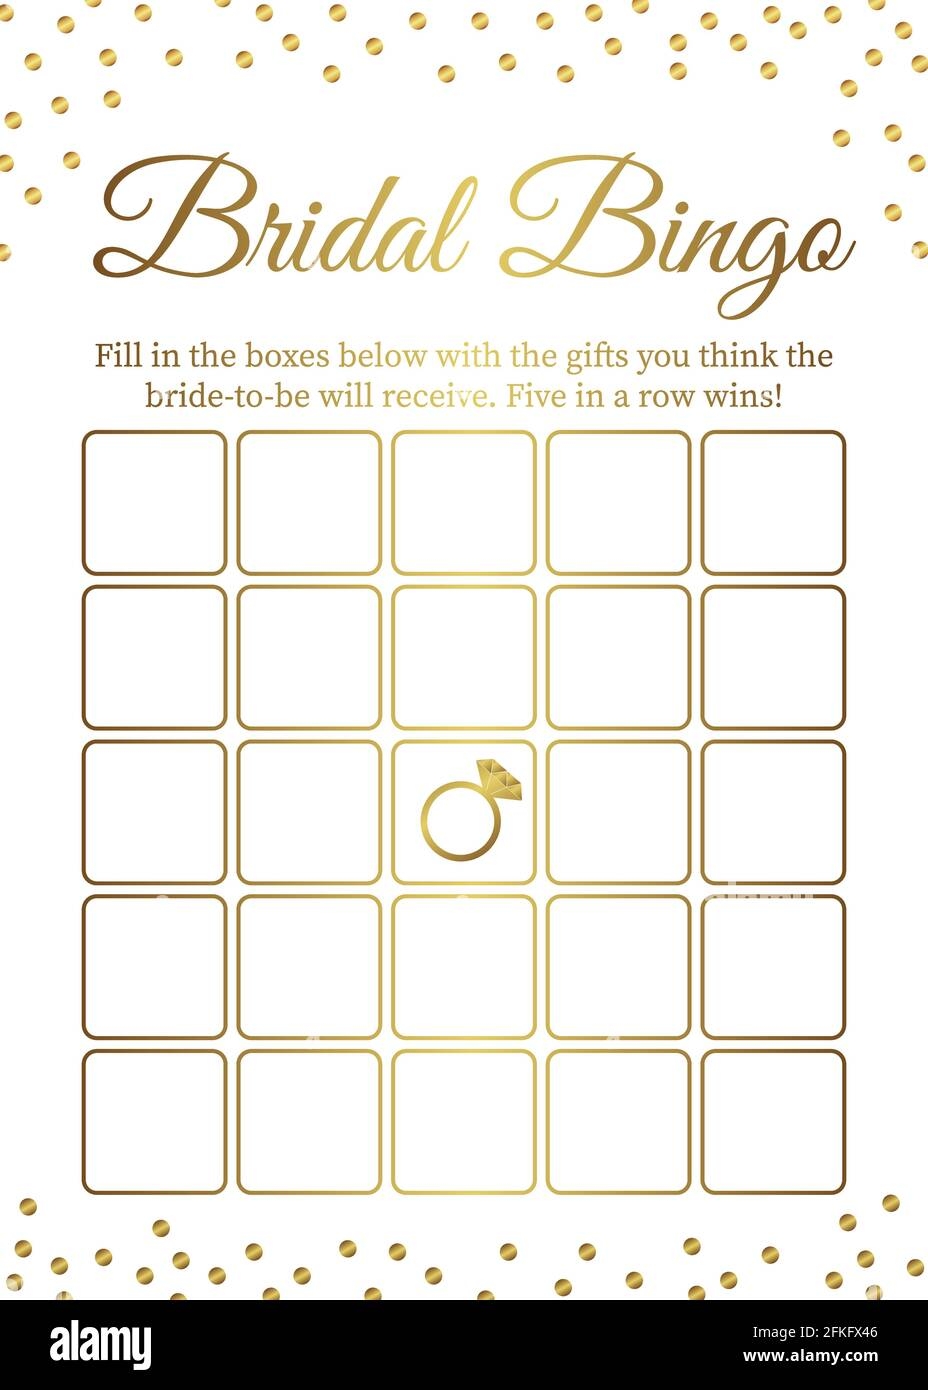 Bridal Bingo Card Template Bridal Shower Bingo Games Funny Activity For Guests Bachelorette Party Activities Wedding Stationery Gold Polka Dots Stock Vector Image Art Alamy - Free Printable Bridal Shower Blank Bingo Games